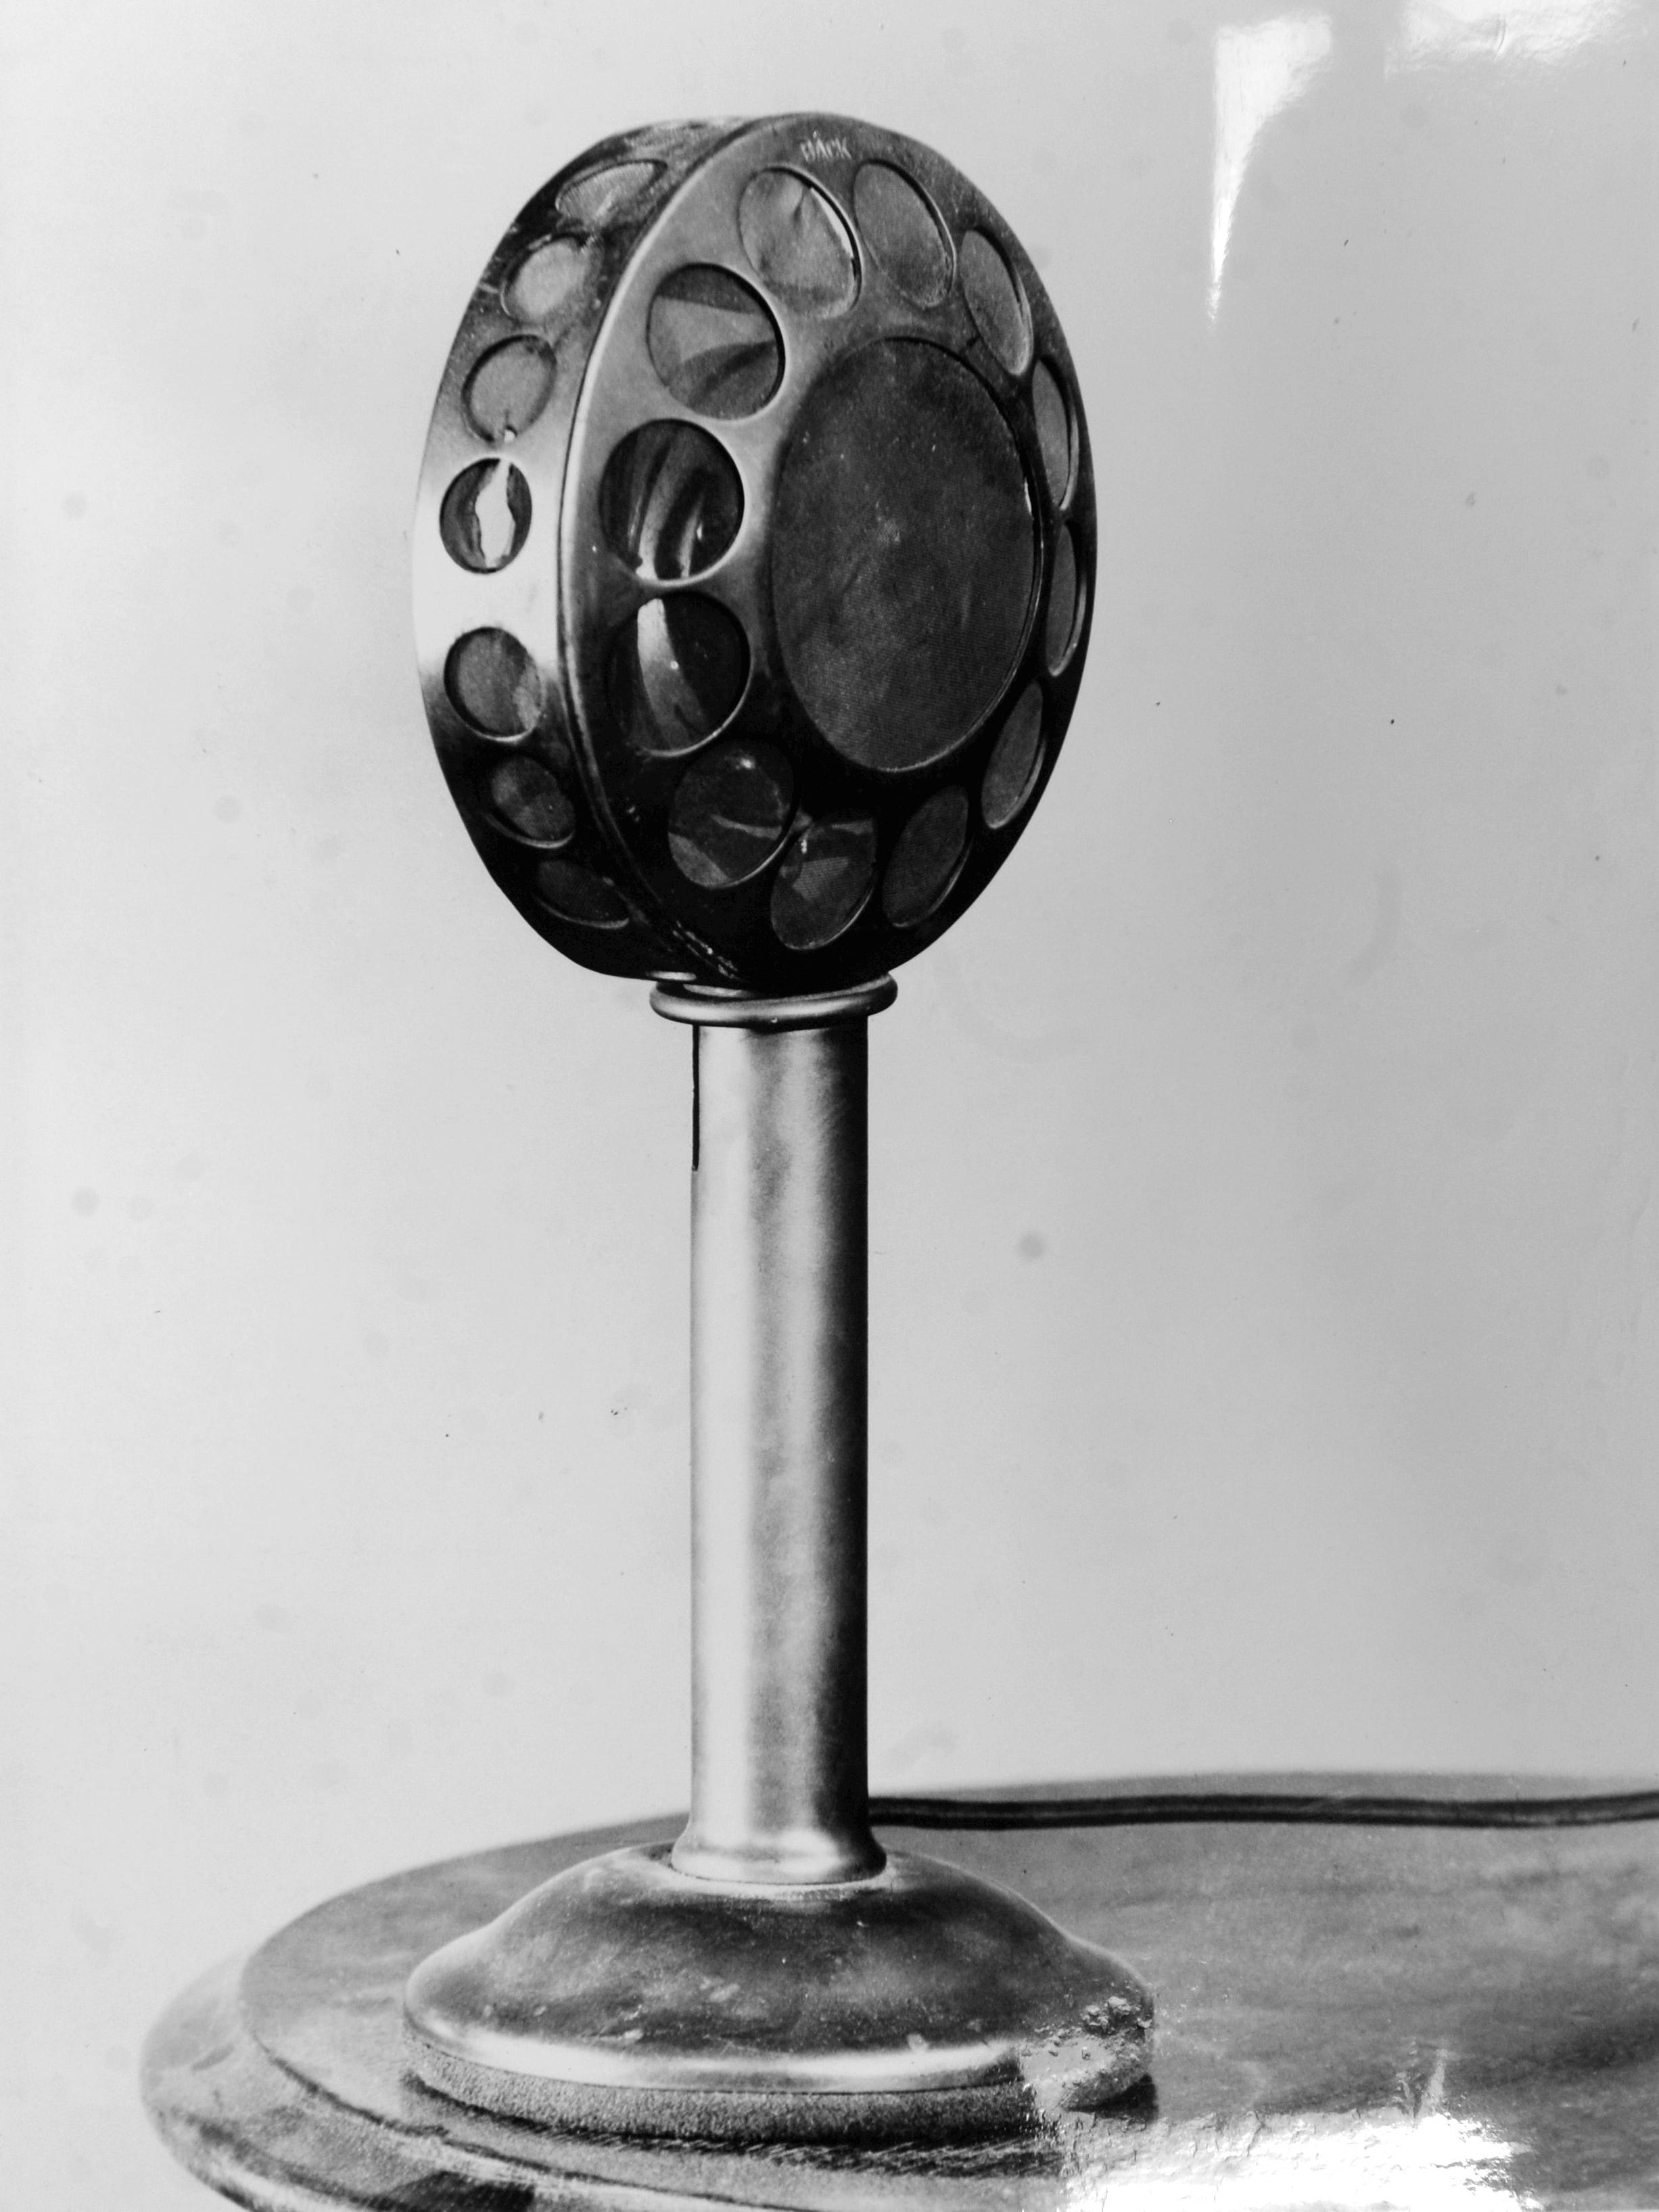 This double-button Western Electric microphone was used by WWJ-The Detroit News in 1923. The newspaper saw the radio station as an adjunct of the newspaper, building good will and promoting The News' brand. The News' practice was to give a 15-minute broadcast at noon, when the first home edition was about to go to press. The intent was to whet the appetite for the full story in The News.  After the final edition was on the streets in the evening, another 10-minute broadcast was aired.